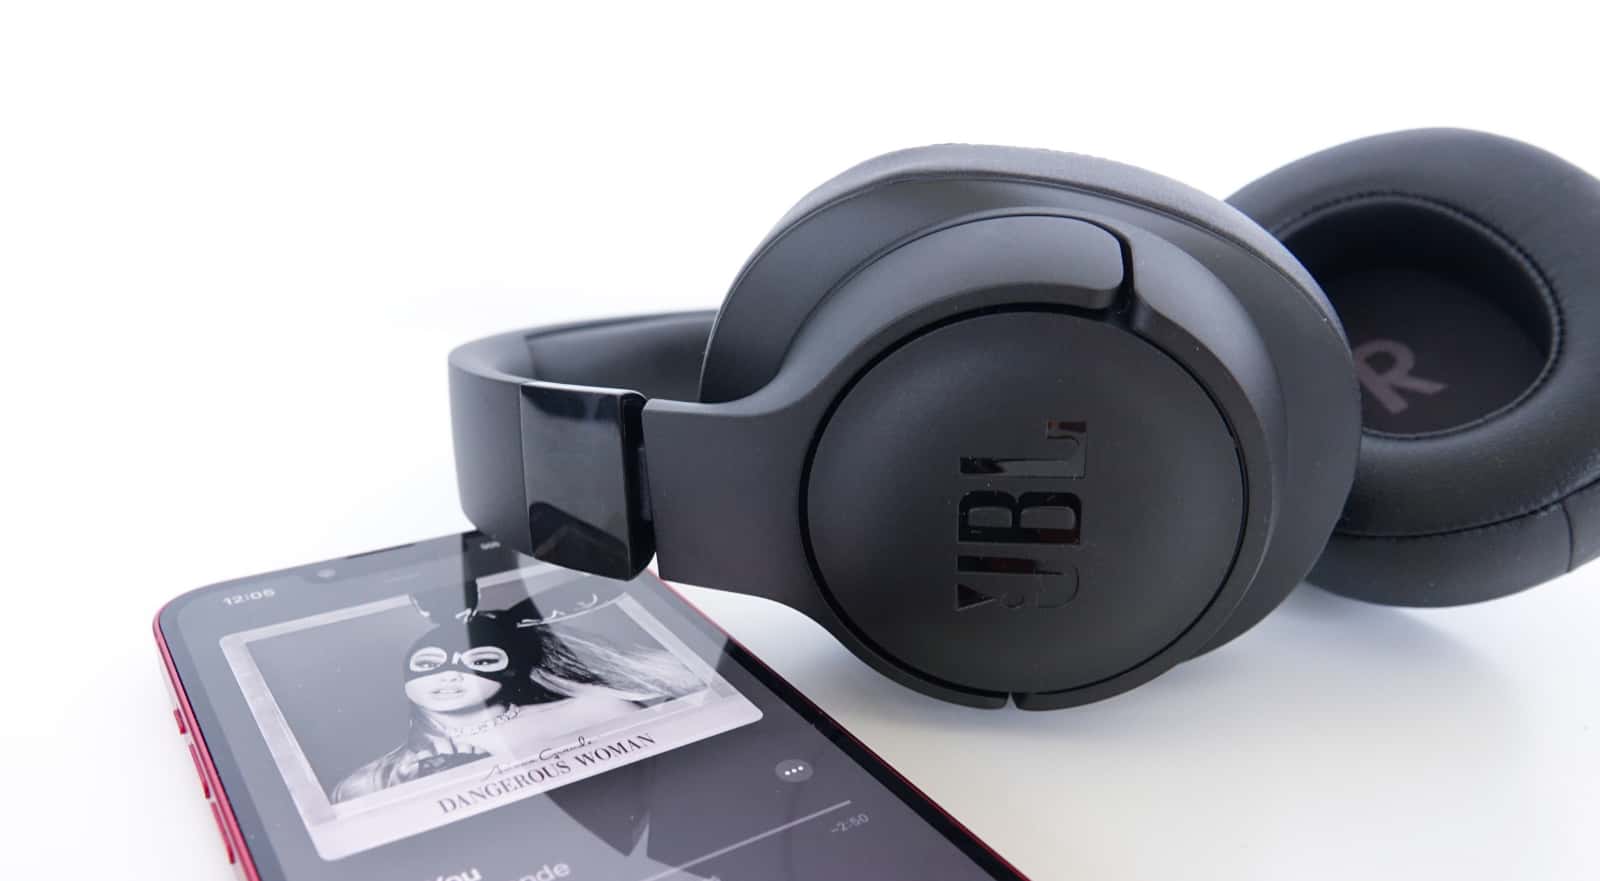 JBL TUNE 760NC Wireless Over-Ear ANC Headphones with Built-in Microphone